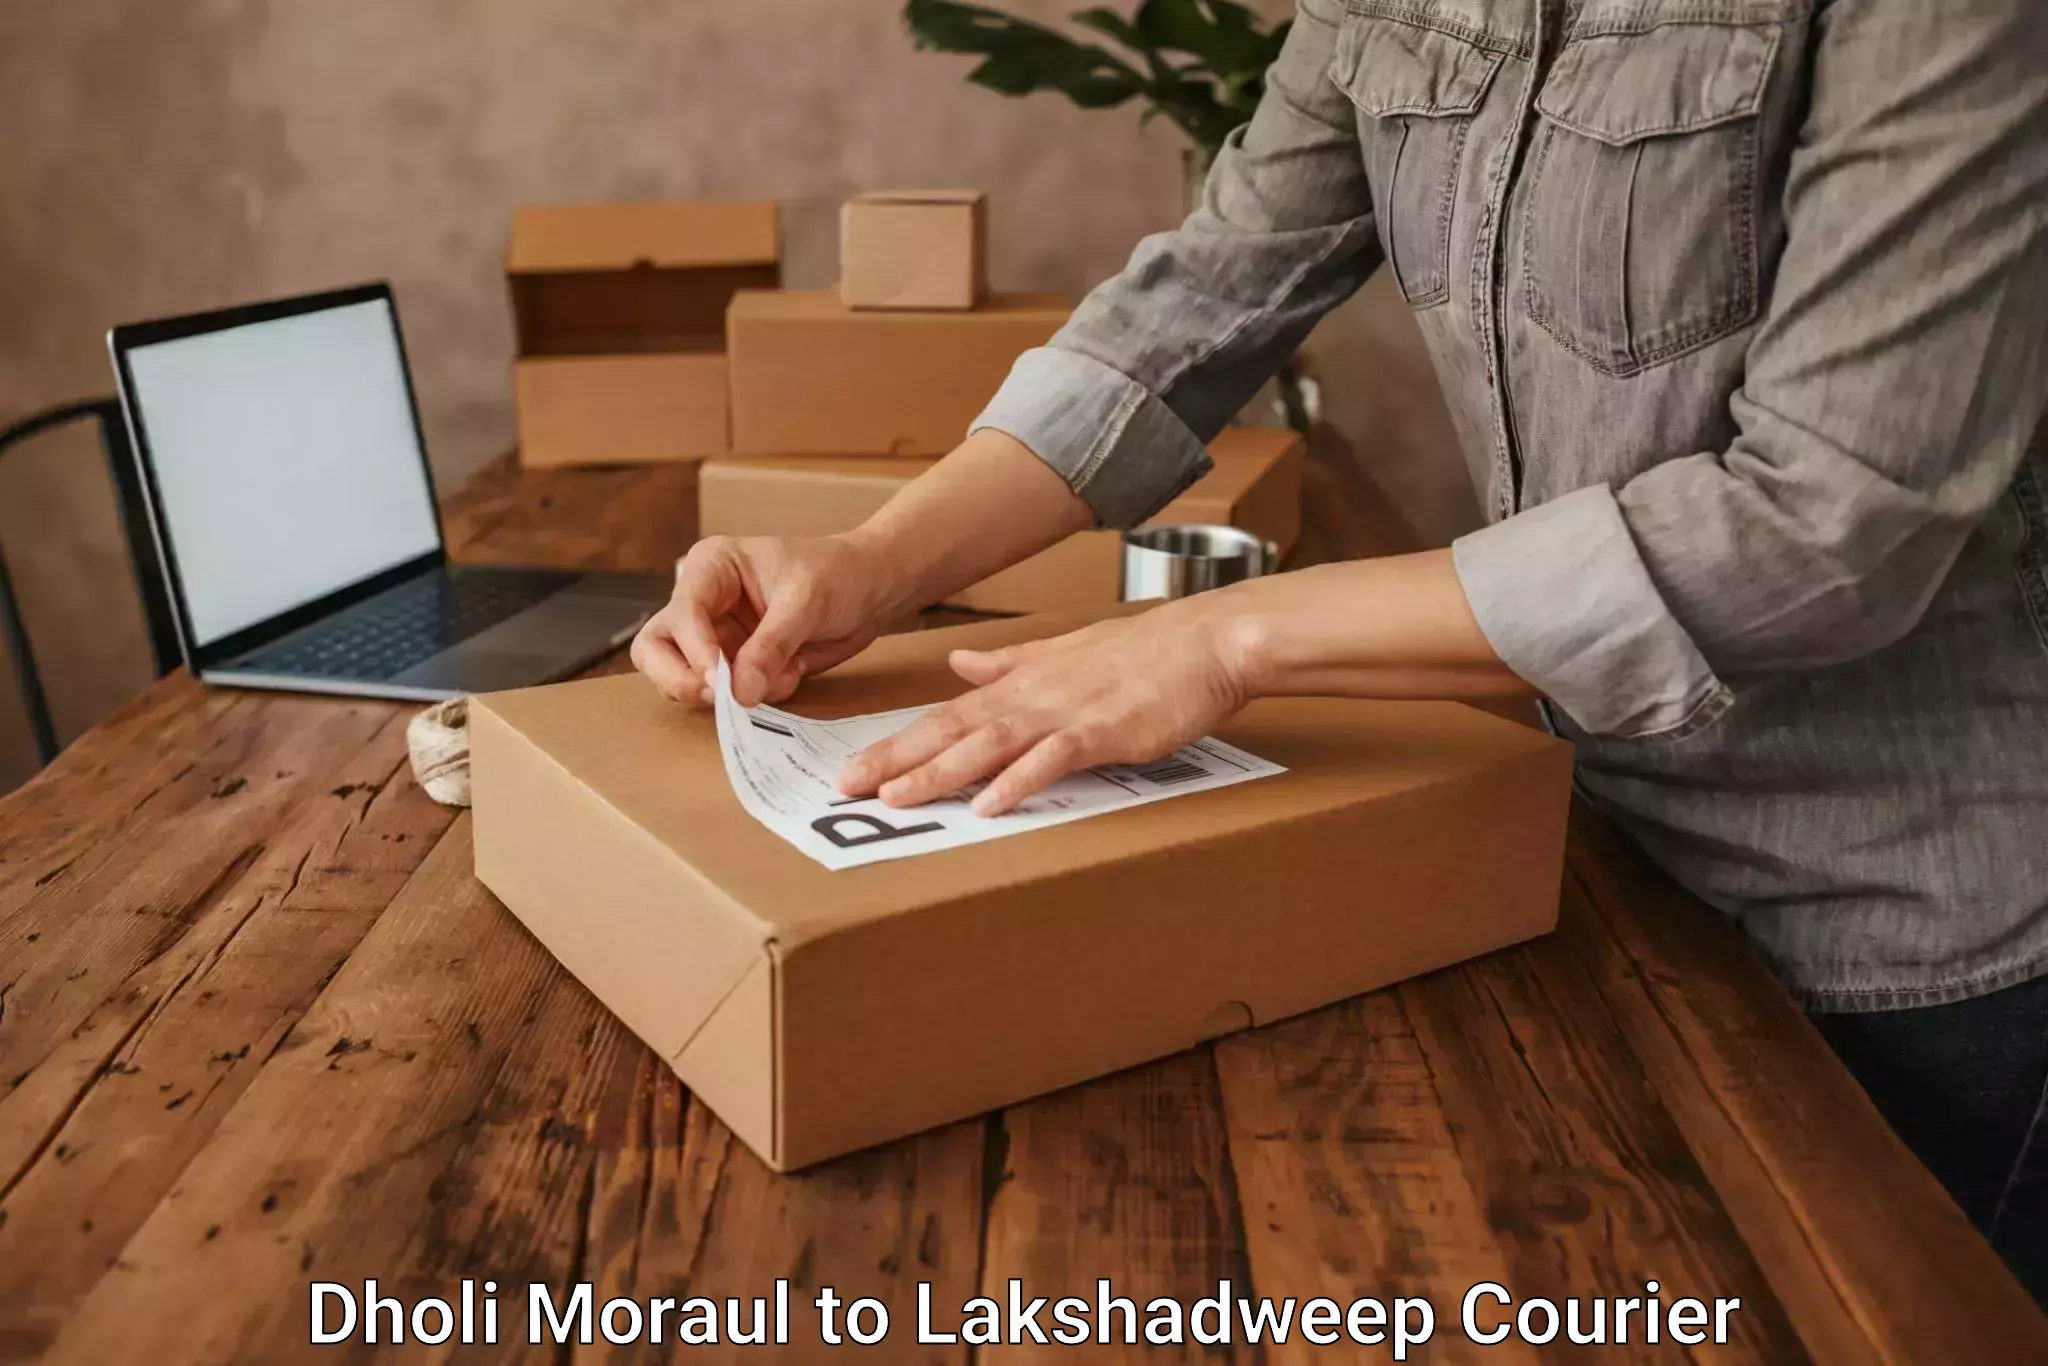 Trusted furniture movers Dholi Moraul to Lakshadweep